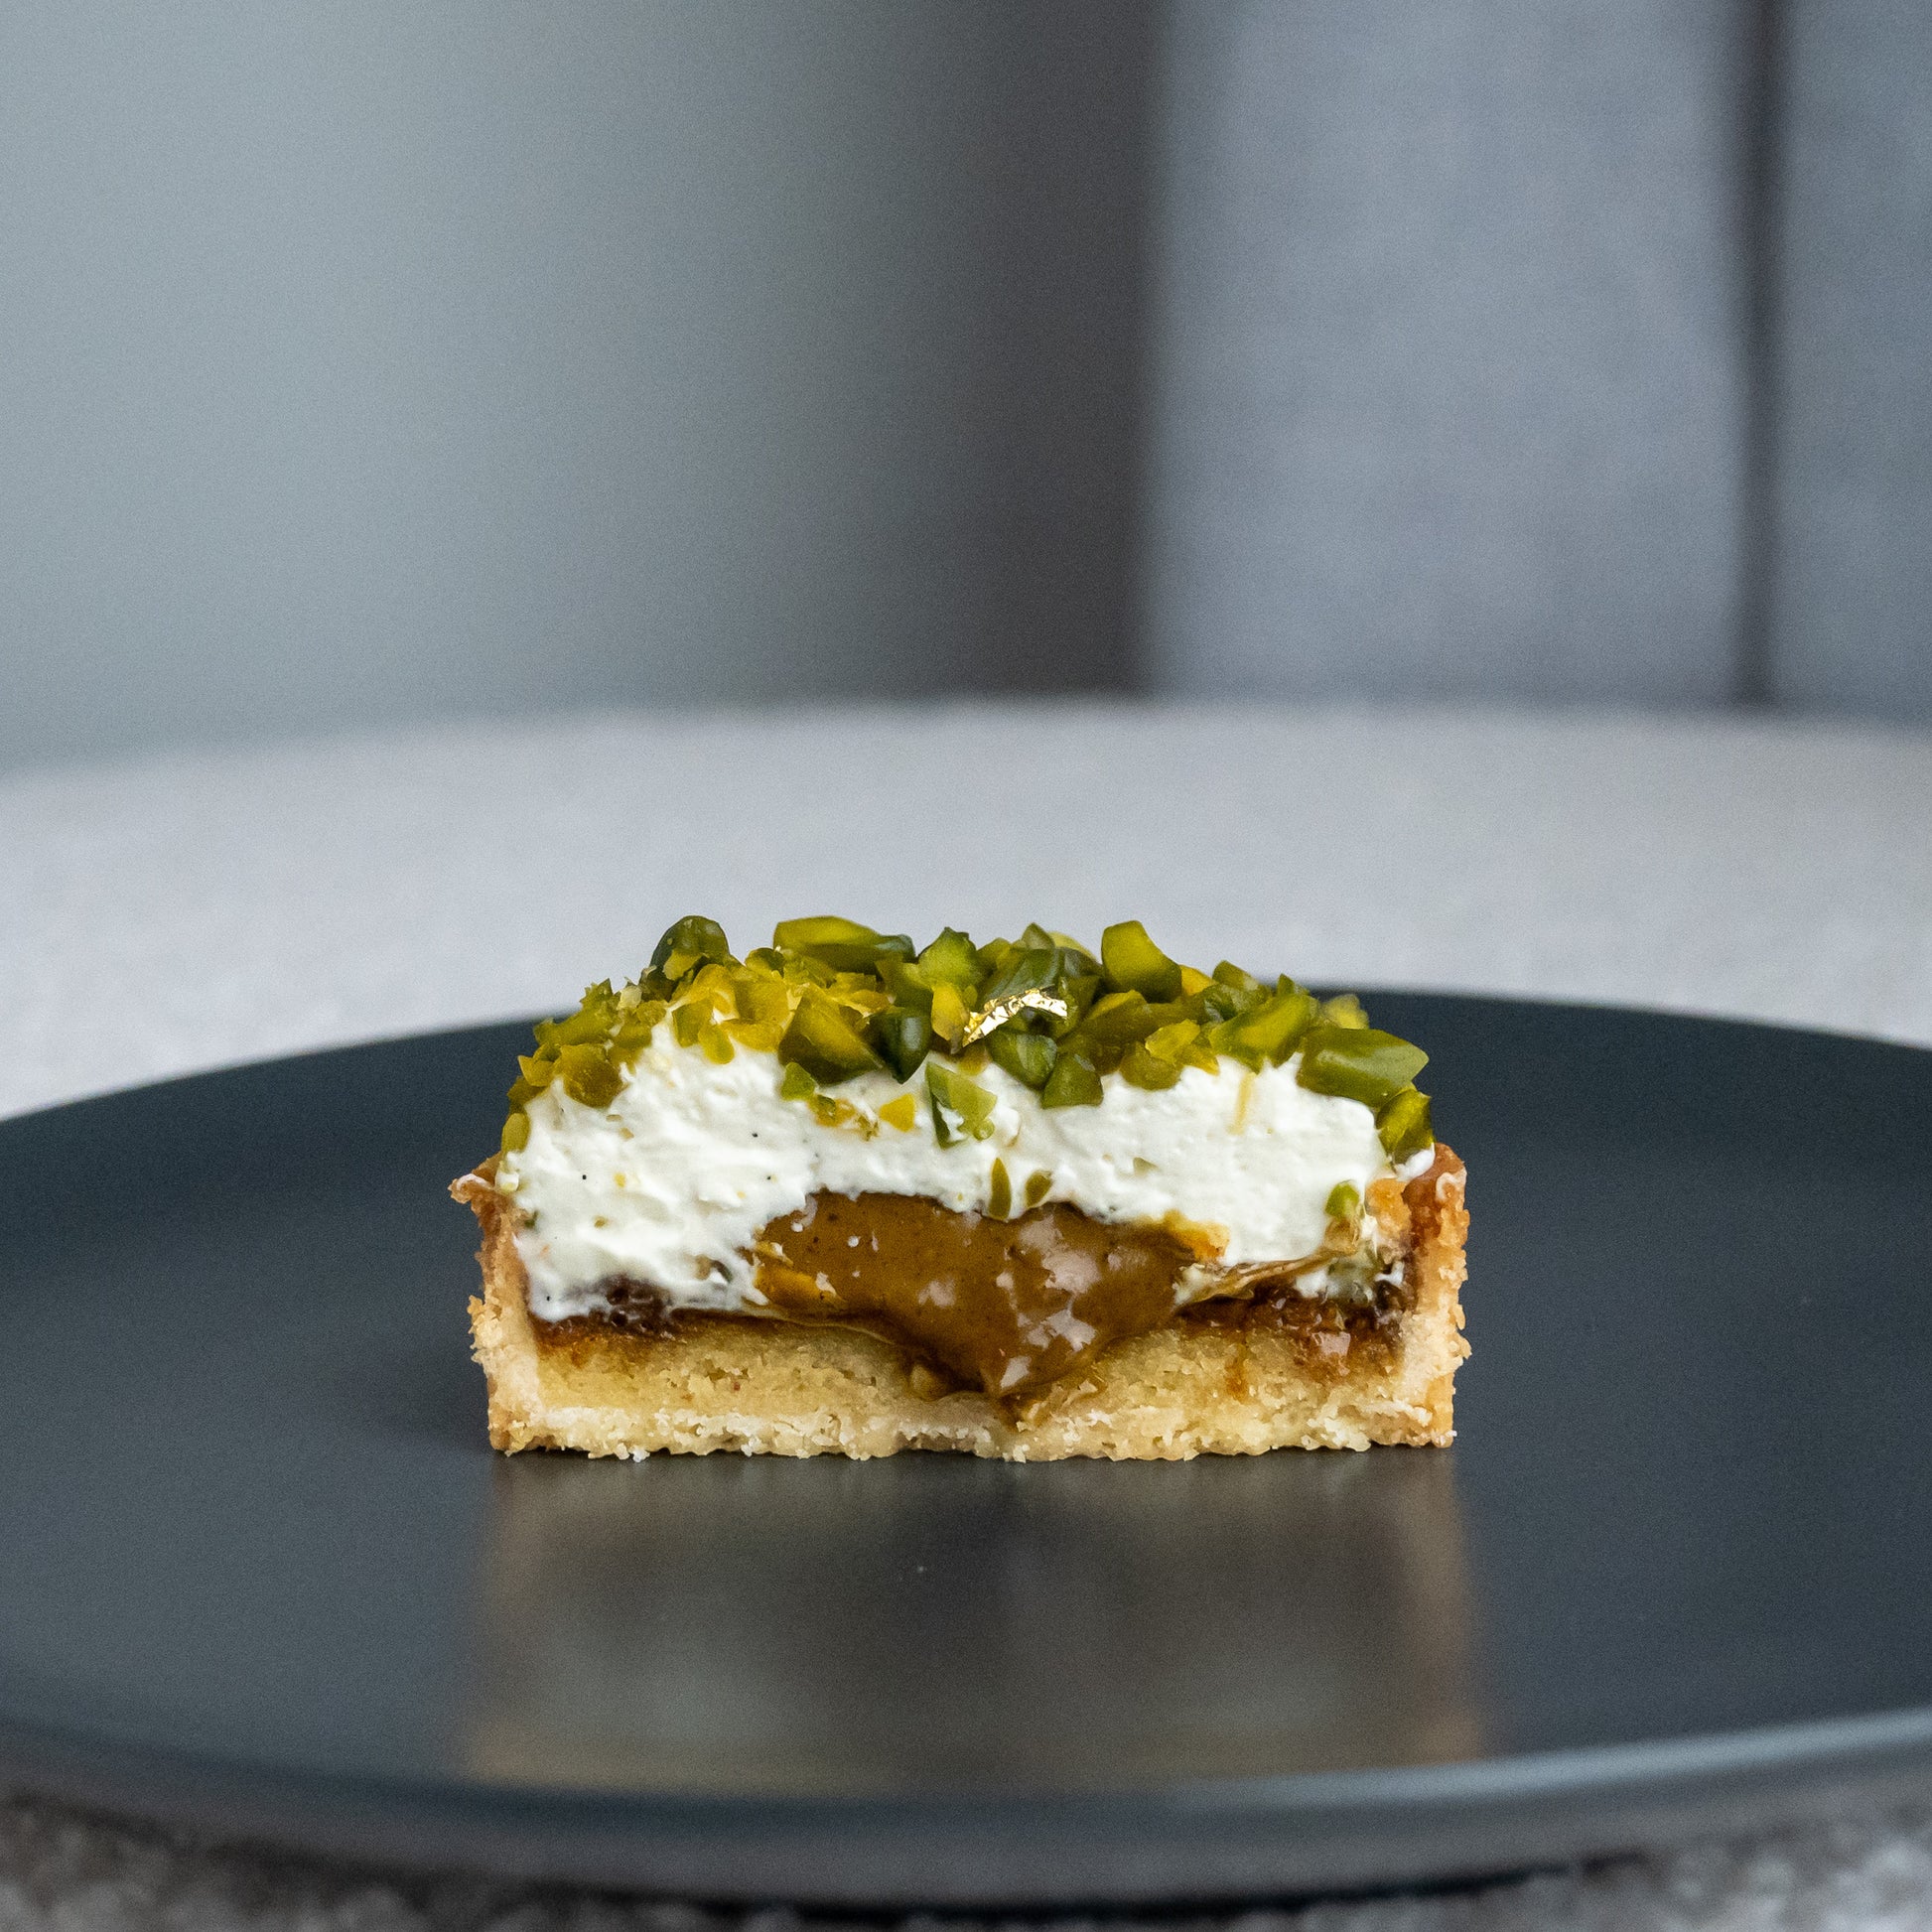 A cross-section view of our best-selling Pistachio Tart, revealing layers of crispy tart base, frangipane cream, crunchy pistachio praliné, and a liquid center of praliné. The tart is topped with a dollop of vanilla chantilly cream and sprinkled with chopped Iranian pistachios. The oozing liquid center adds an extra touch of decadence to this already indulgent treat.